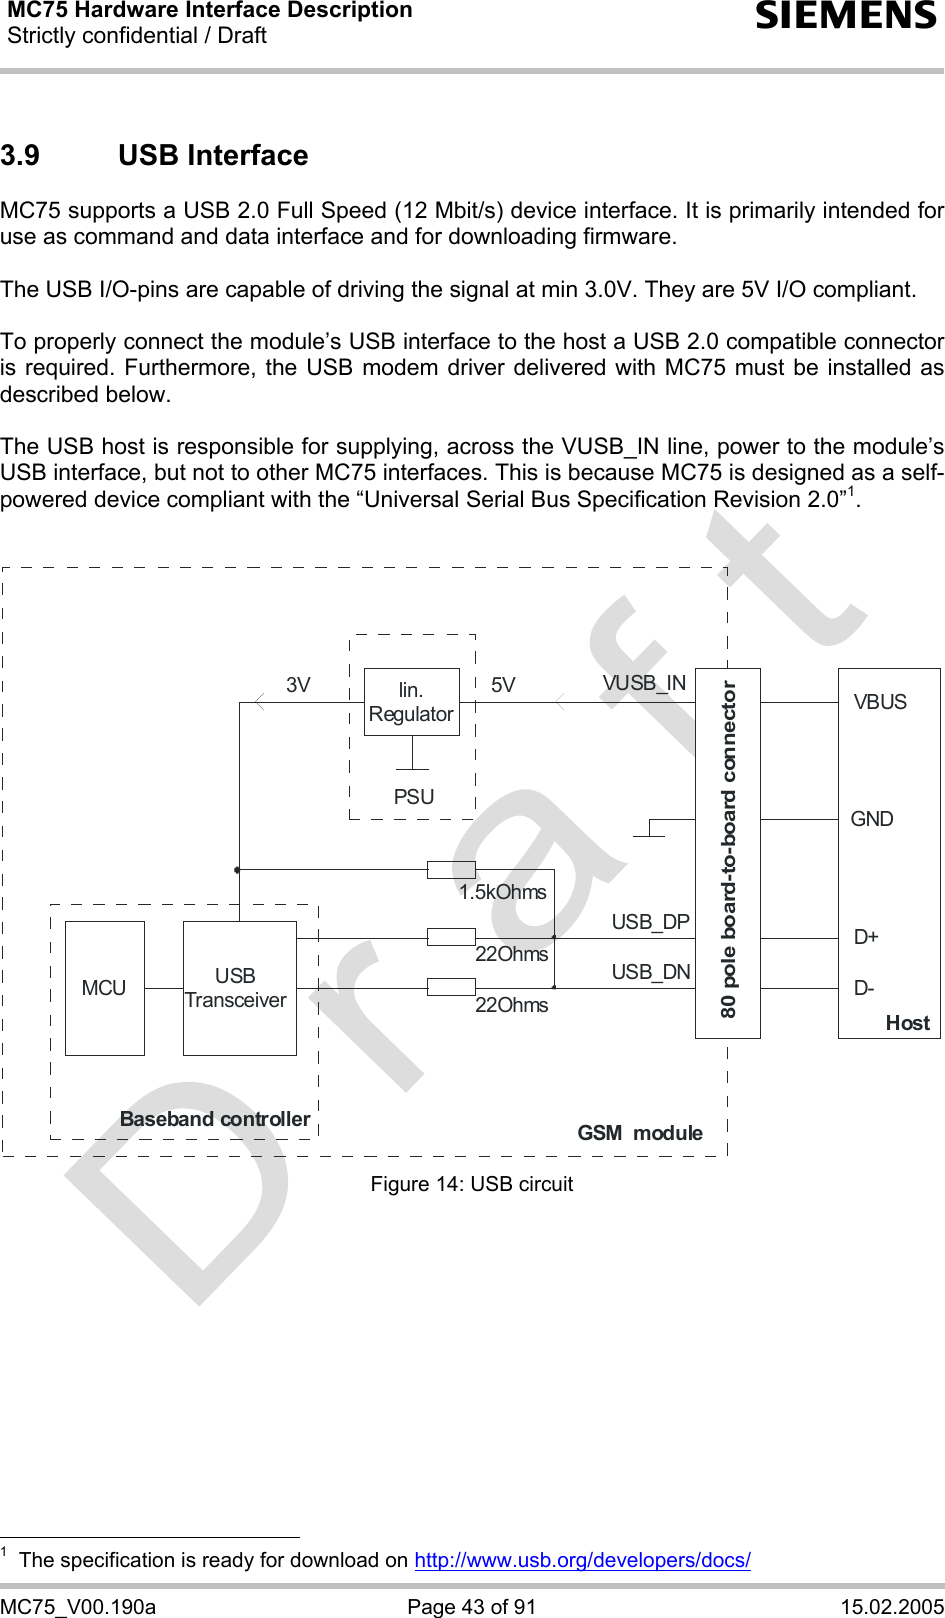 MC75 Hardware Interface Description Strictly confidential / Draft  s MC75_V00.190a  Page 43 of 91  15.02.2005 3.9 USB Interface MC75 supports a USB 2.0 Full Speed (12 Mbit/s) device interface. It is primarily intended for use as command and data interface and for downloading firmware.  The USB I/O-pins are capable of driving the signal at min 3.0V. They are 5V I/O compliant.  To properly connect the module’s USB interface to the host a USB 2.0 compatible connector is required. Furthermore, the USB modem driver delivered with MC75 must be installed as described below.  The USB host is responsible for supplying, across the VUSB_IN line, power to the module’s USB interface, but not to other MC75 interfaces. This is because MC75 is designed as a self-powered device compliant with the “Universal Serial Bus Specification Revision 2.0”1.   MCUUSBTransceiverlin.RegulatorPSUBaseband controllerGSM  moduleHost22Ohms22Ohms1.5kOhmsUSB_DPUSB_DNVUSB_IN5V3VD+D-VBUSGND80 pole board-to-board connector Figure 14: USB circuit                                                    1  The specification is ready for download on http://www.usb.org/developers/docs/ 